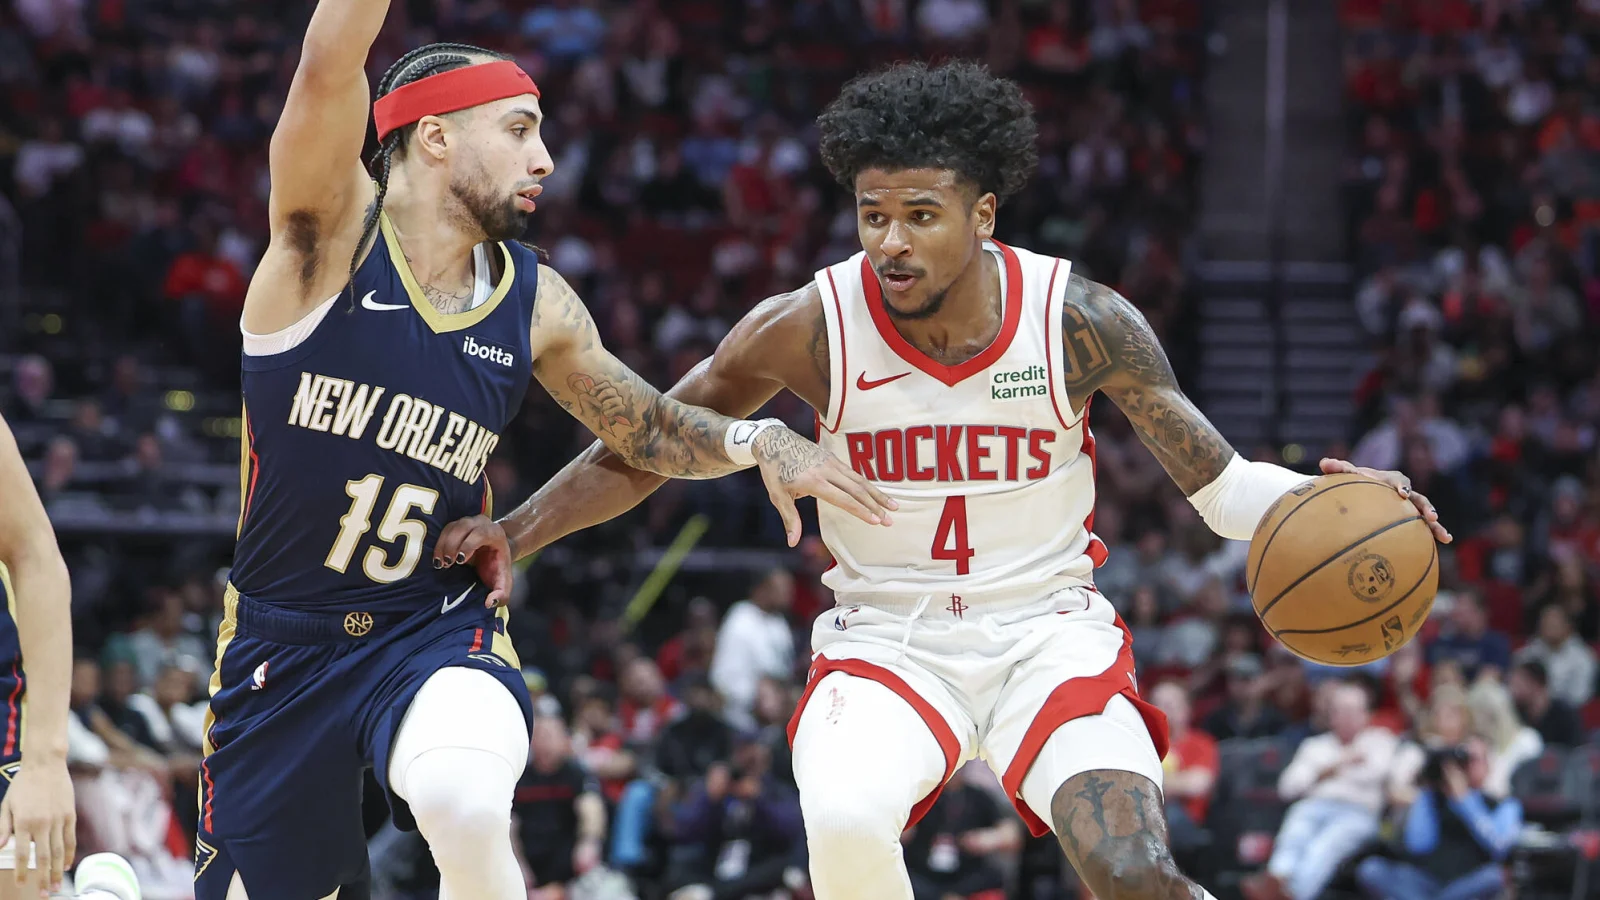 Rockets Weighing Options: Will Jalen Green Stay or Go Before Trade Deadline?